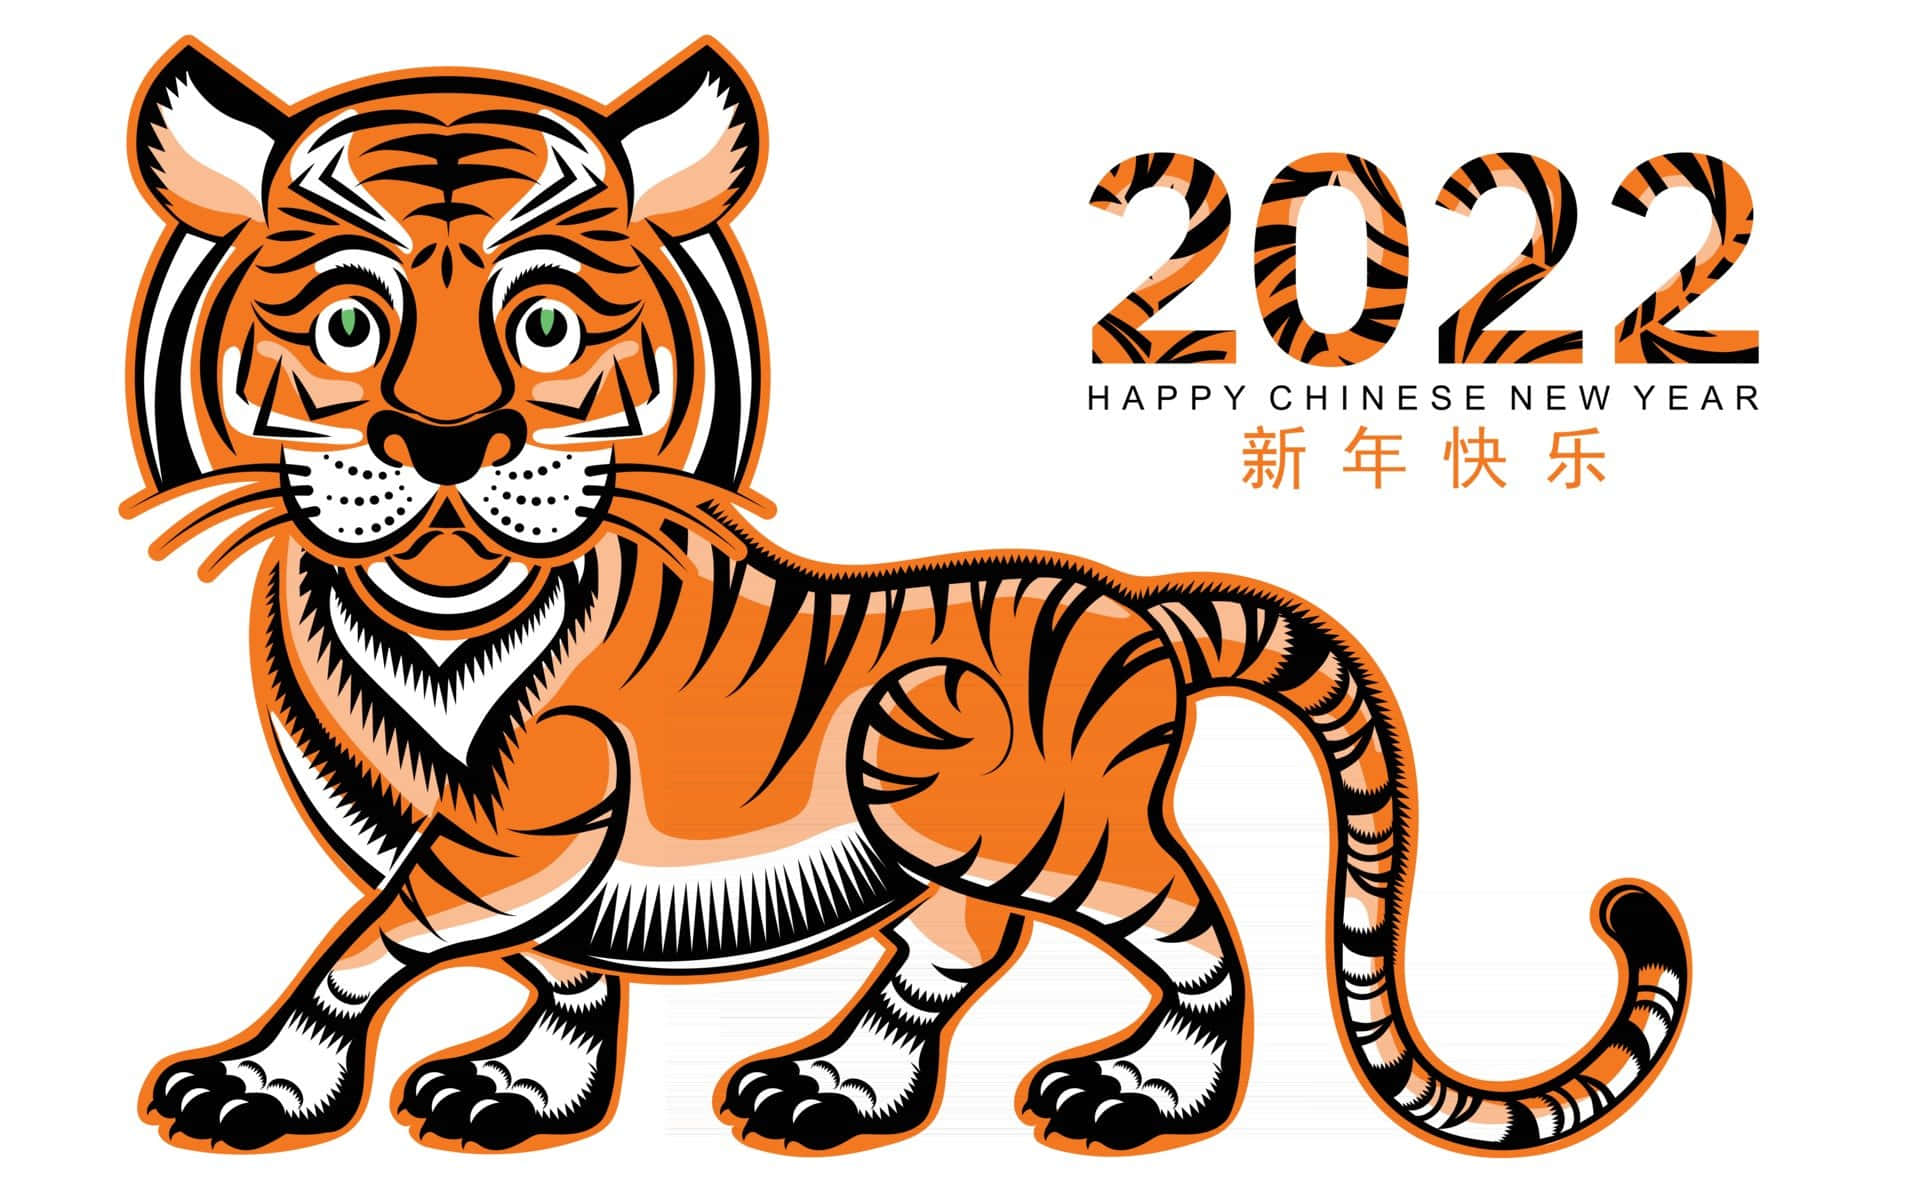 Caption: Welcoming Chinese New Year 2022 With A Touch Of Festivity And Tradition